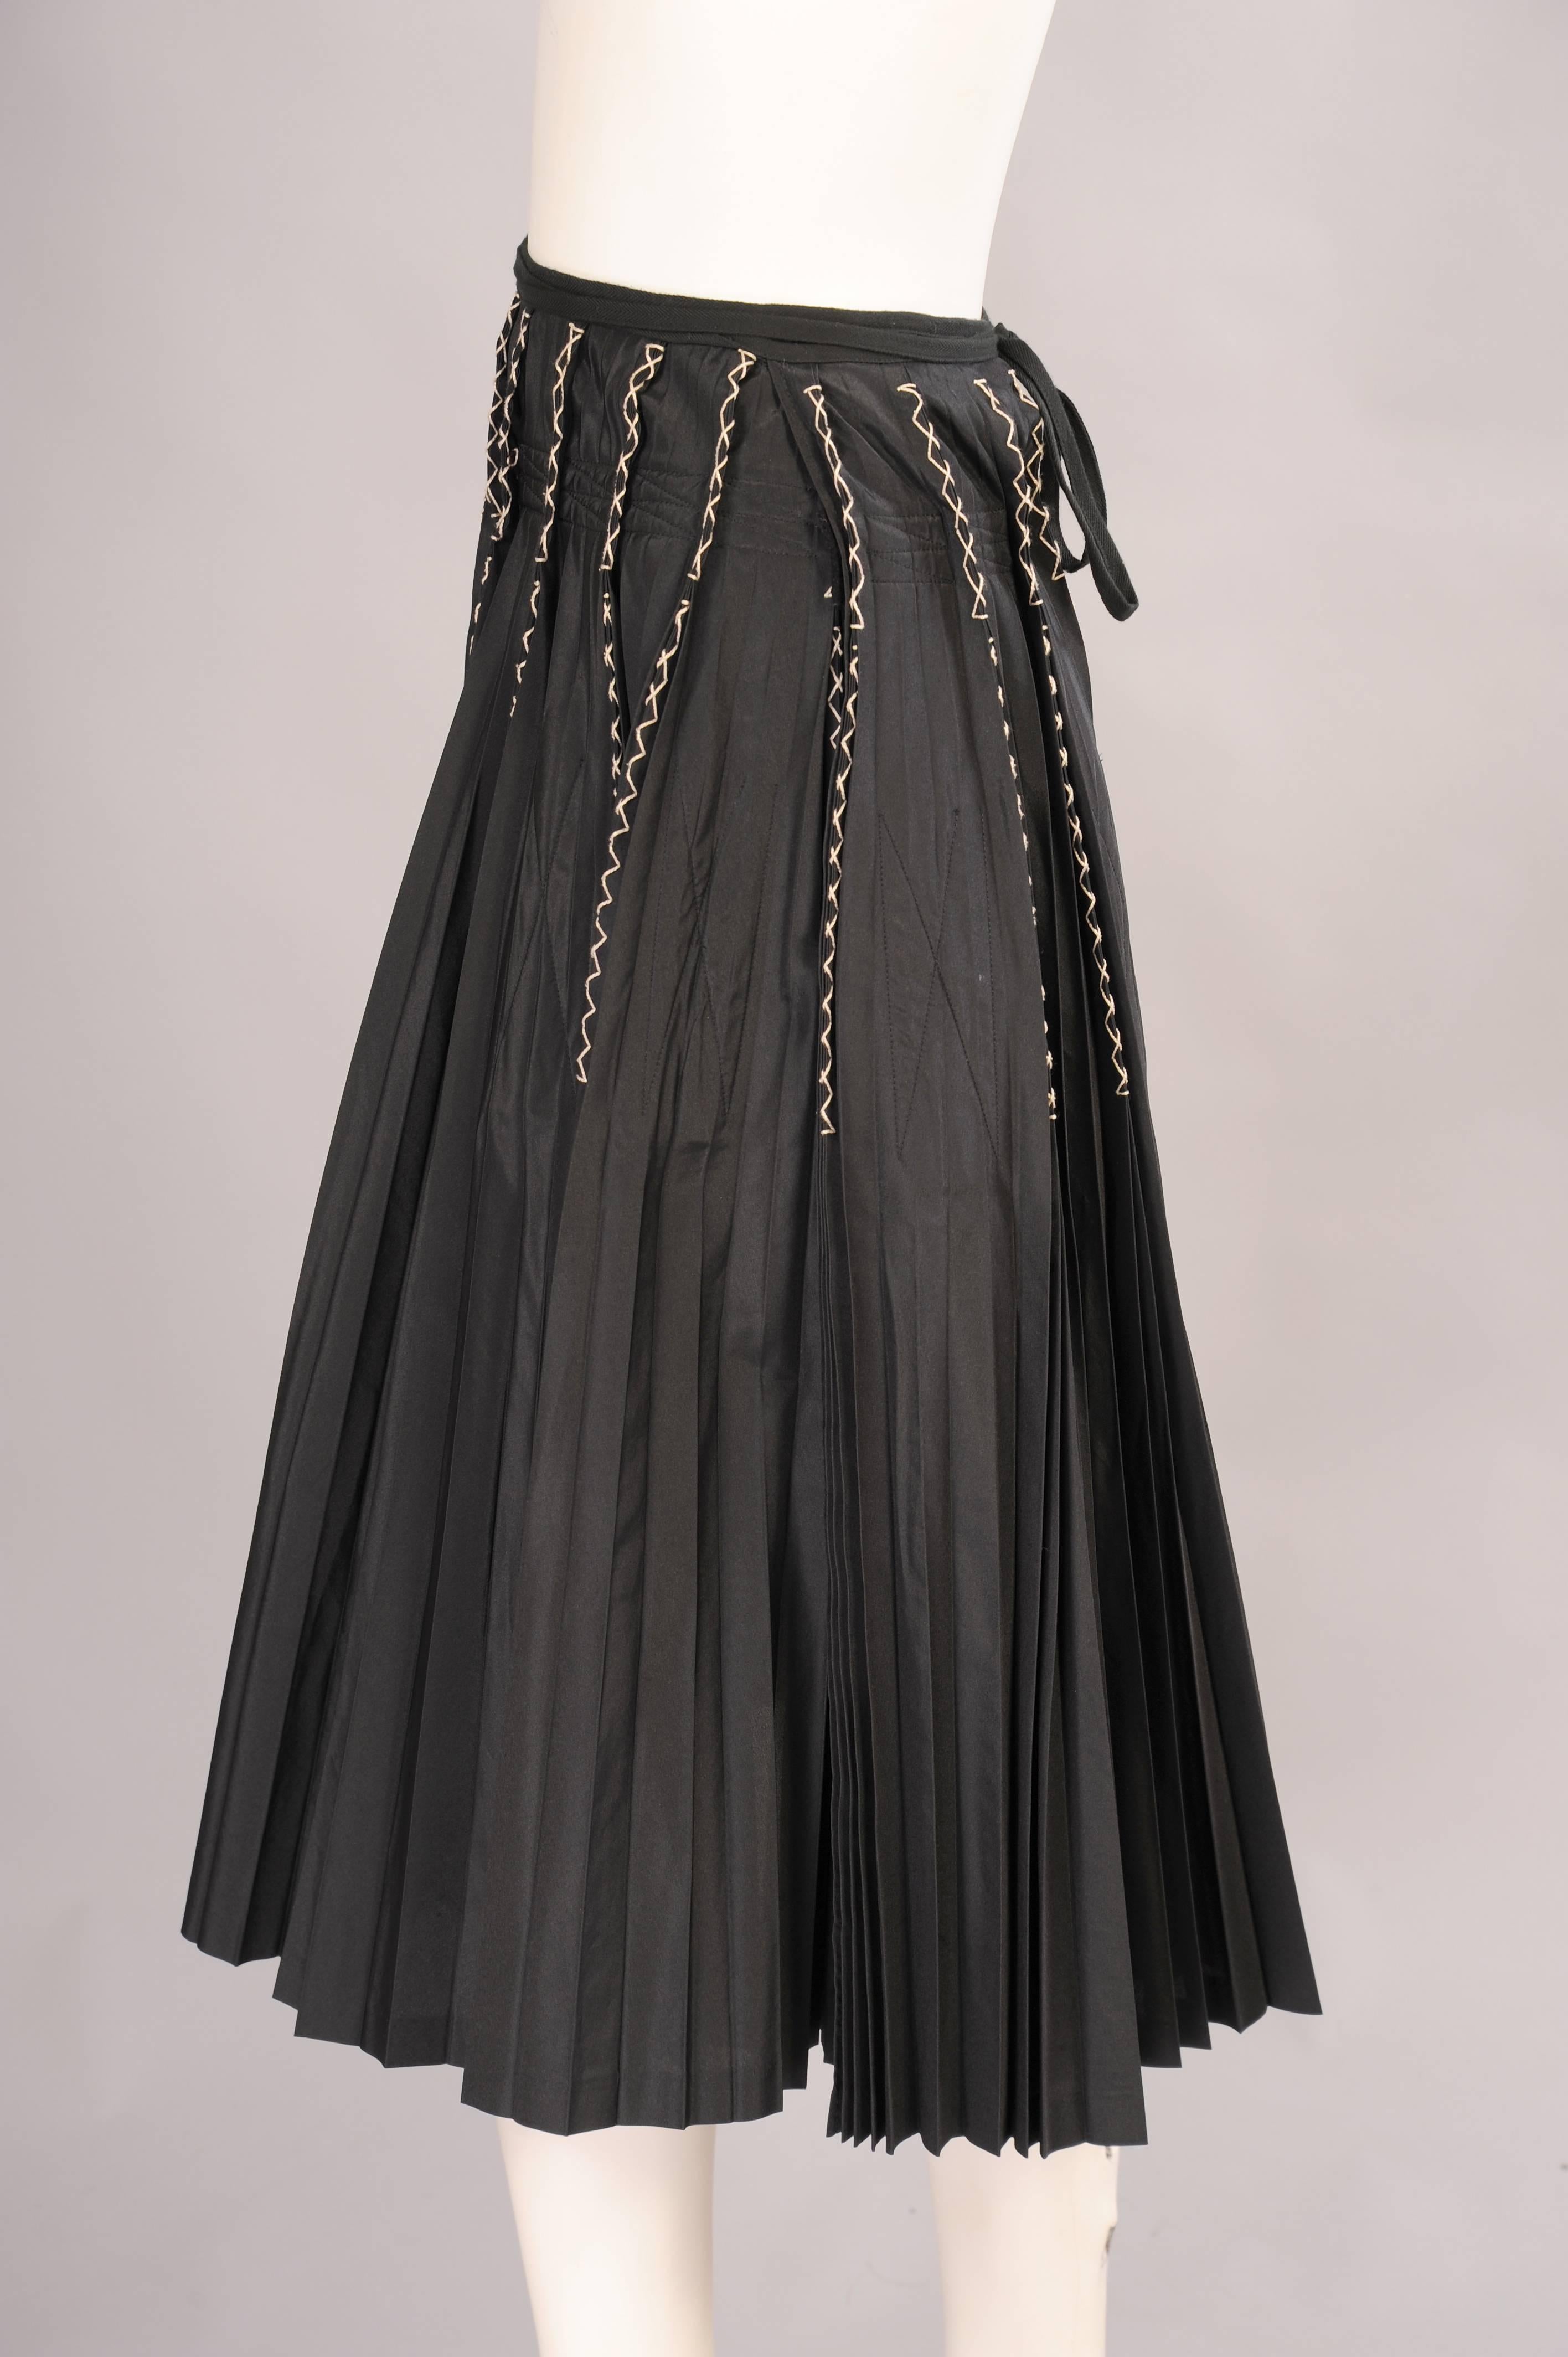 White embroidery is used to stitch some of the pleats together on this great silk blend wrap skirt from Yohji Yamamoto. An interior band around the hips  and rectangles in the skirt insure the pleats will stay pleated. A black tape is used for the